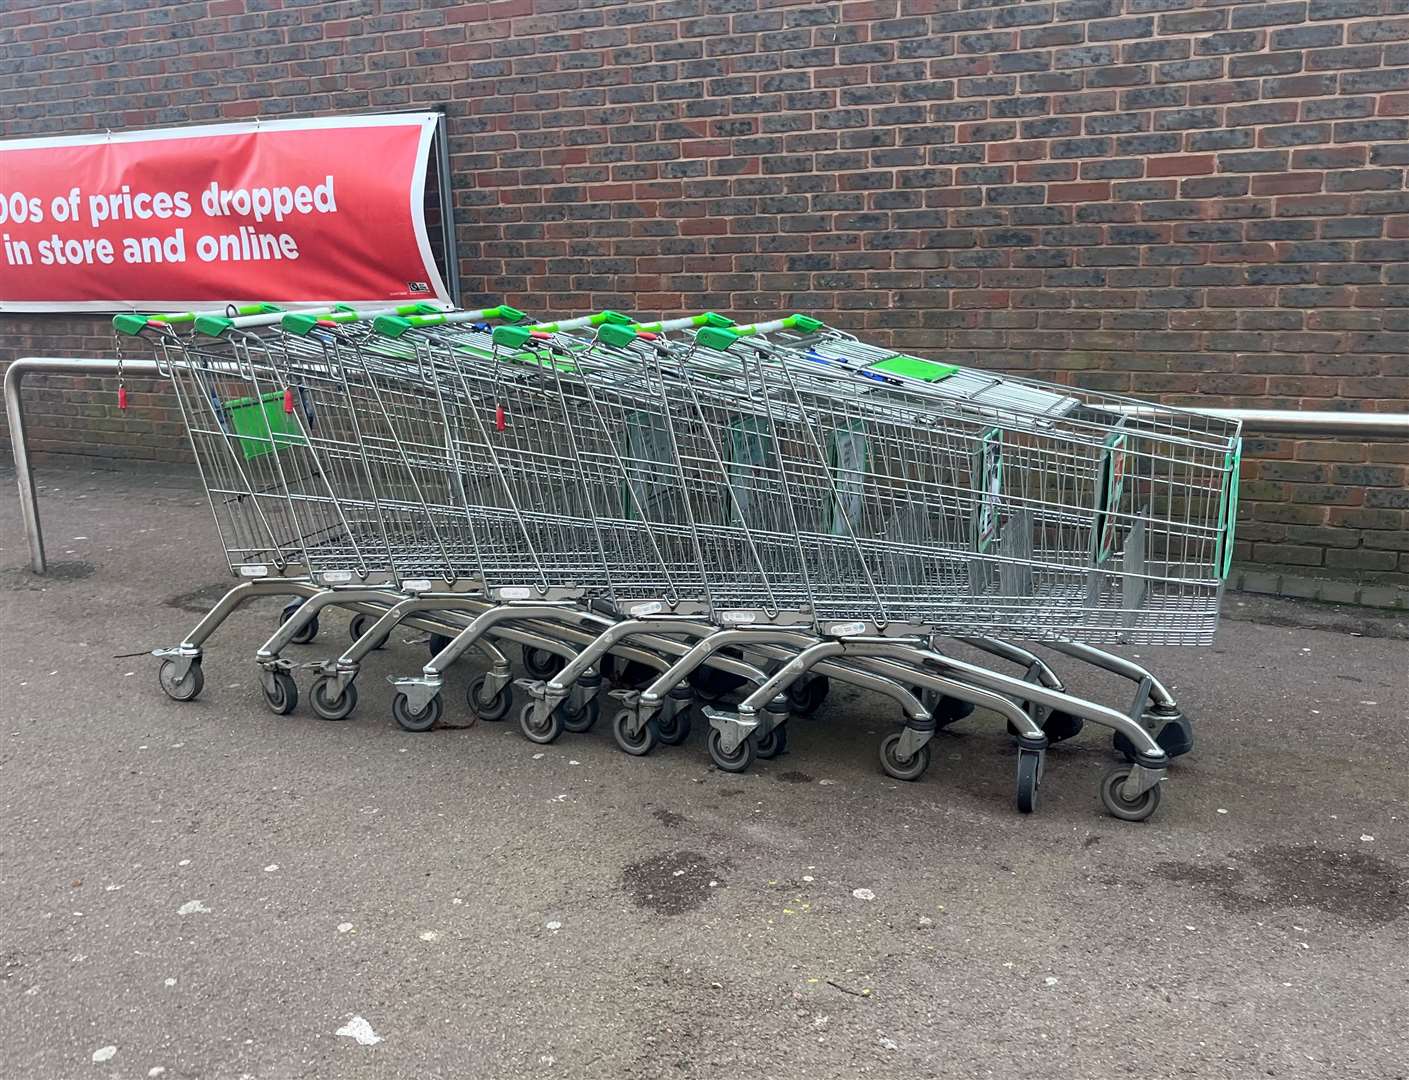 Since the last week of December, Swanley Town Councli has collected 210 ASDA trollies